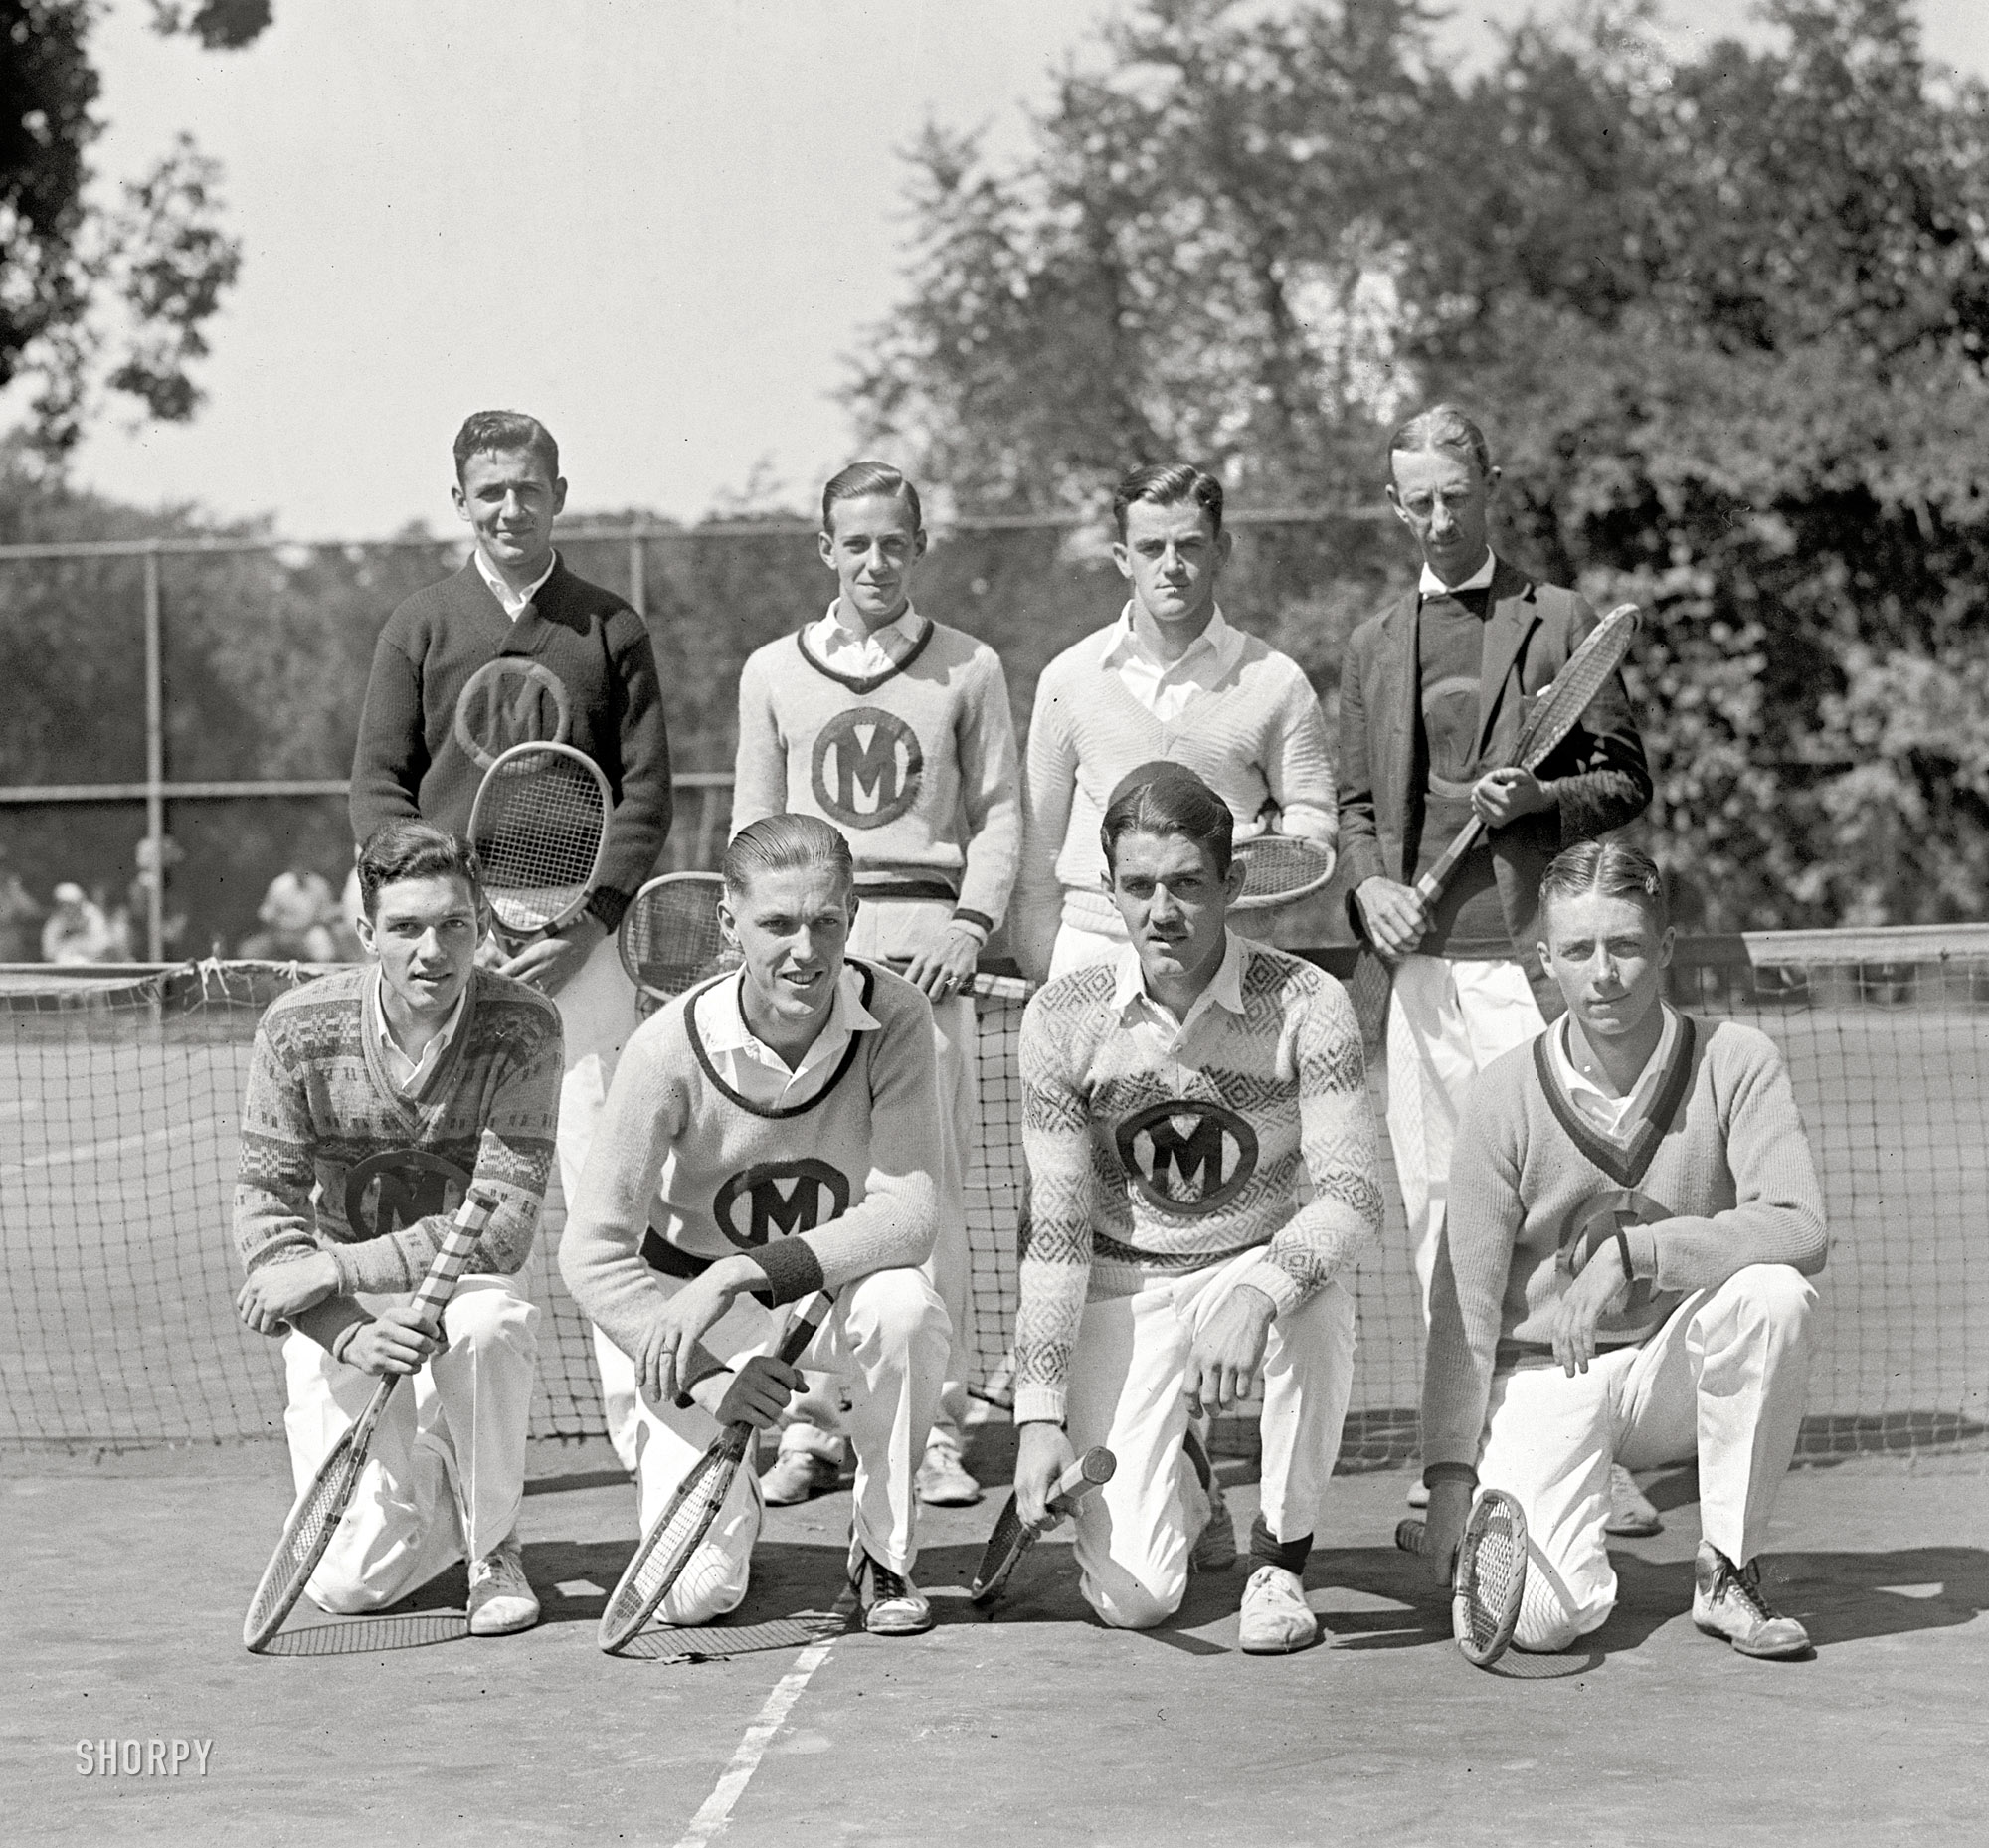 Washington, D.C., 1925. "Montrose tennis team." The Eight Racqueteers. National Photo Company Collection glass negative. View full size.